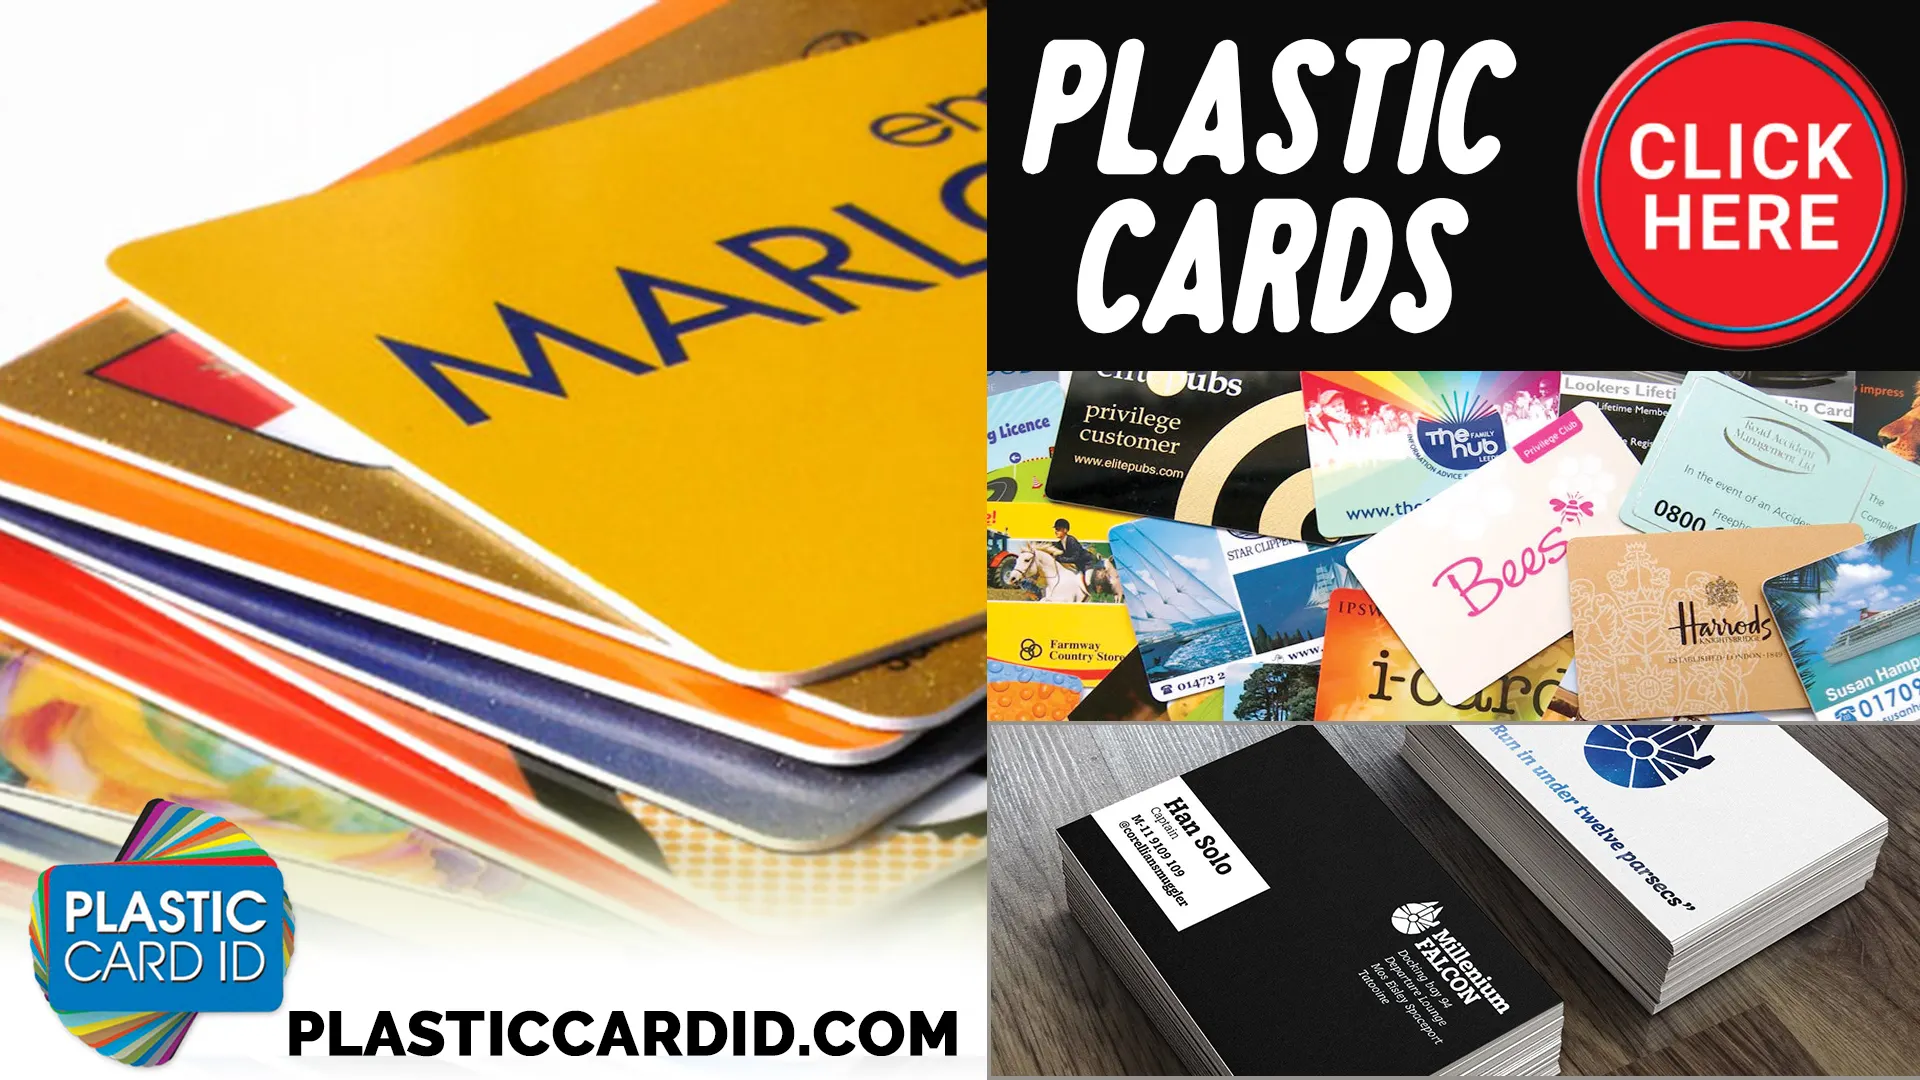 Plastic Card ID
: The Leader in Contactless Payment Integration